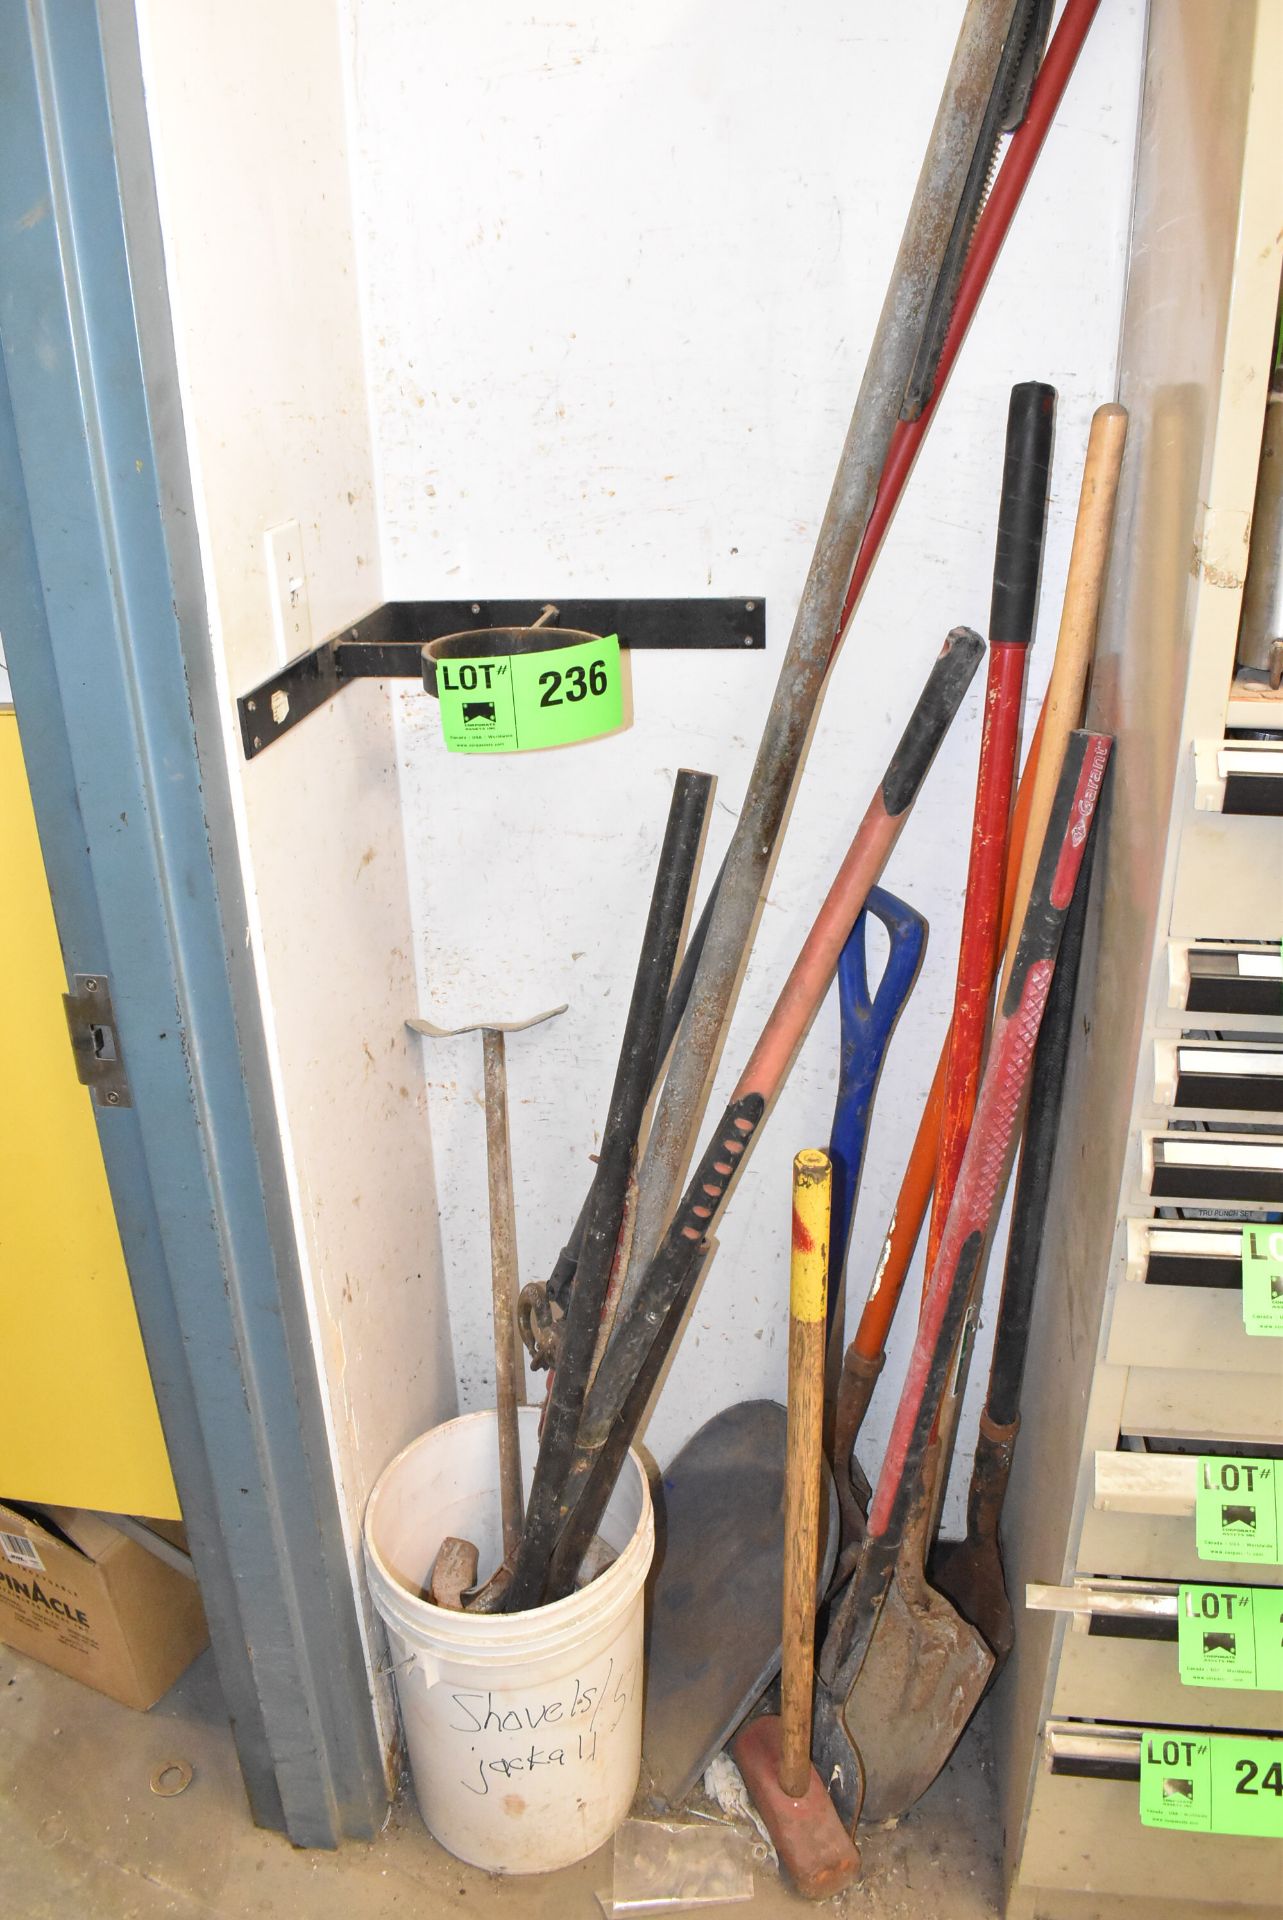 LOT/ HAND TOOLS SHOVELS AND SLEDGE HAMMER [RIGGING FEE FOR LOT #236 - $25 CAD PLUS APPLICABLE